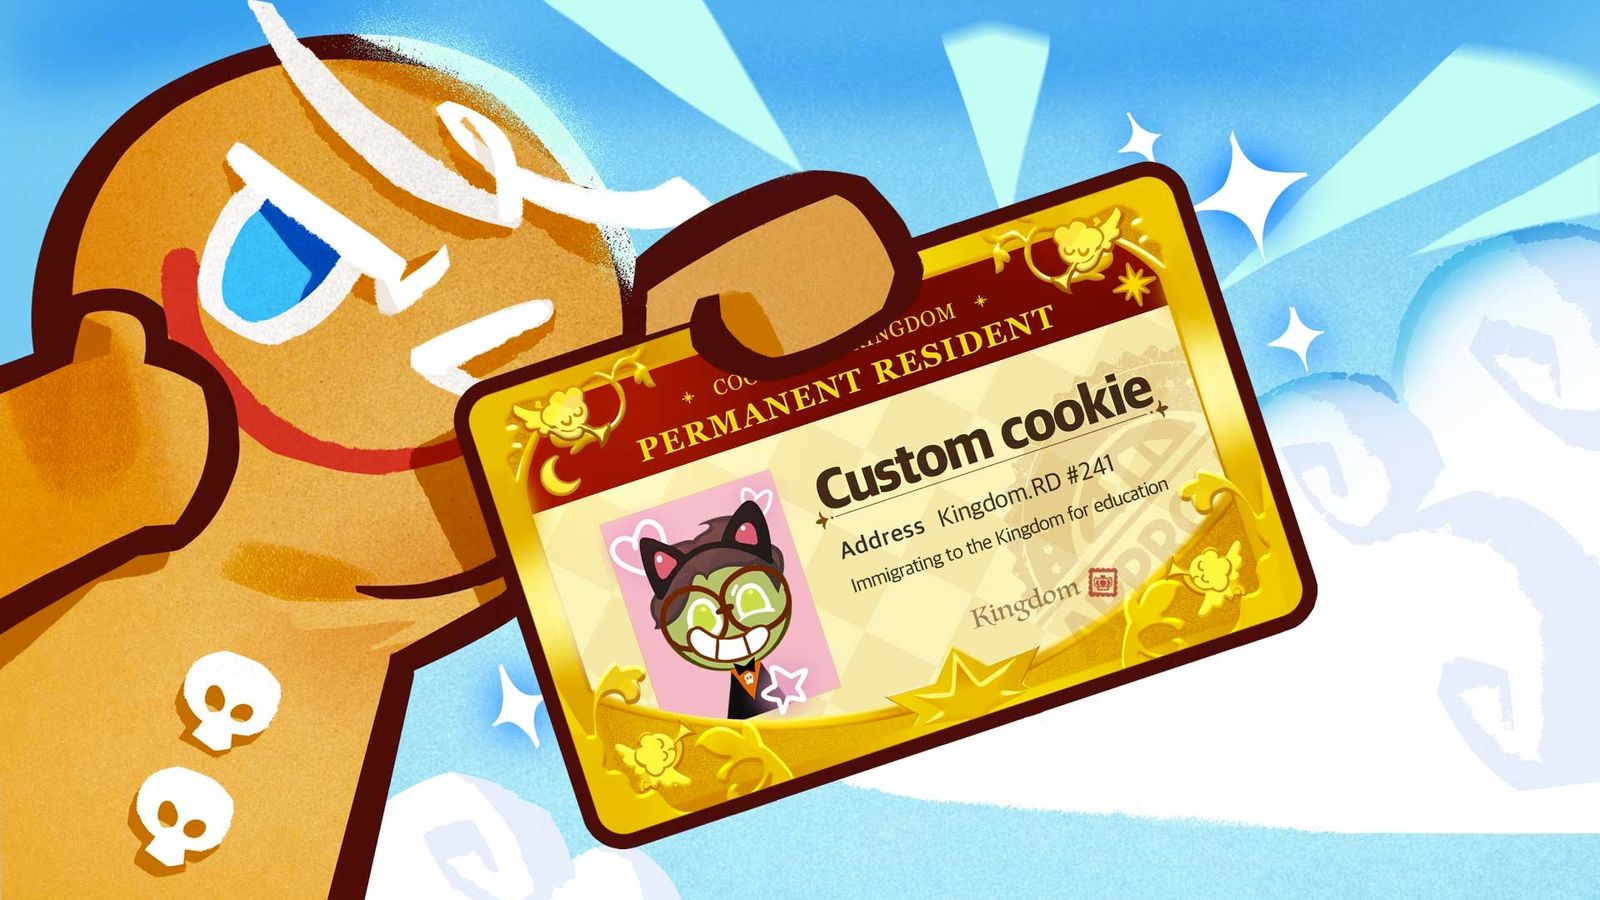 Image of a cookie from Cookie Run: Kingdom holding an ID card